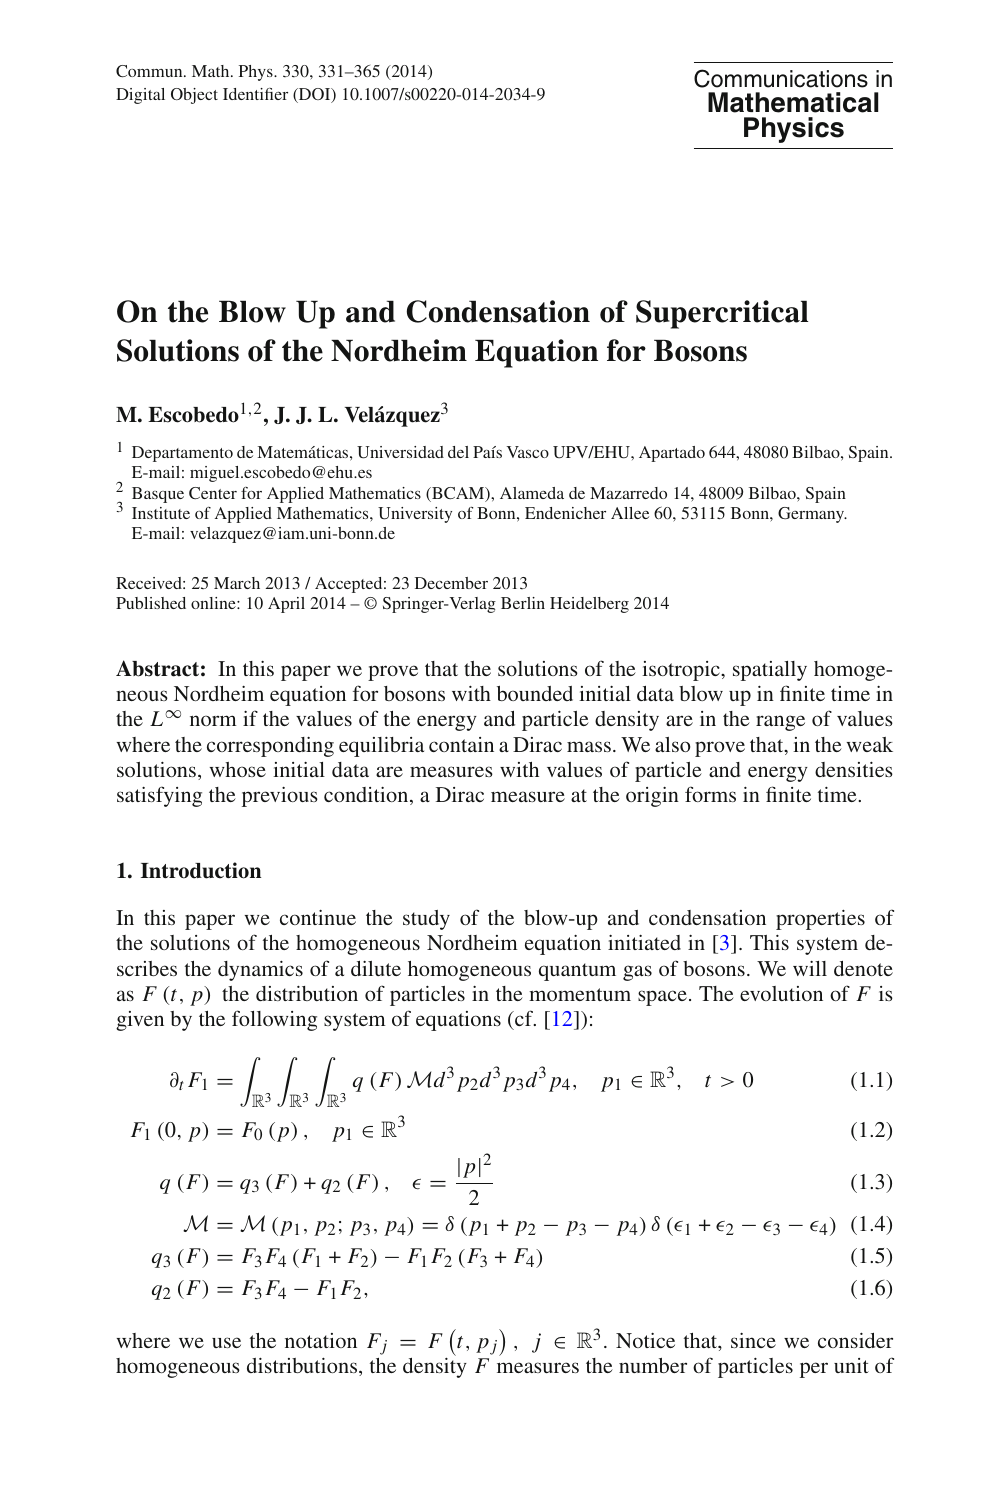 On The Blow Up And Condensation Of Supercritical Solutions Of The Nordheim Equation For Bosons Topic Of Research Paper In Mathematics Download Scholarly Article Pdf And Read For Free On Cyberleninka